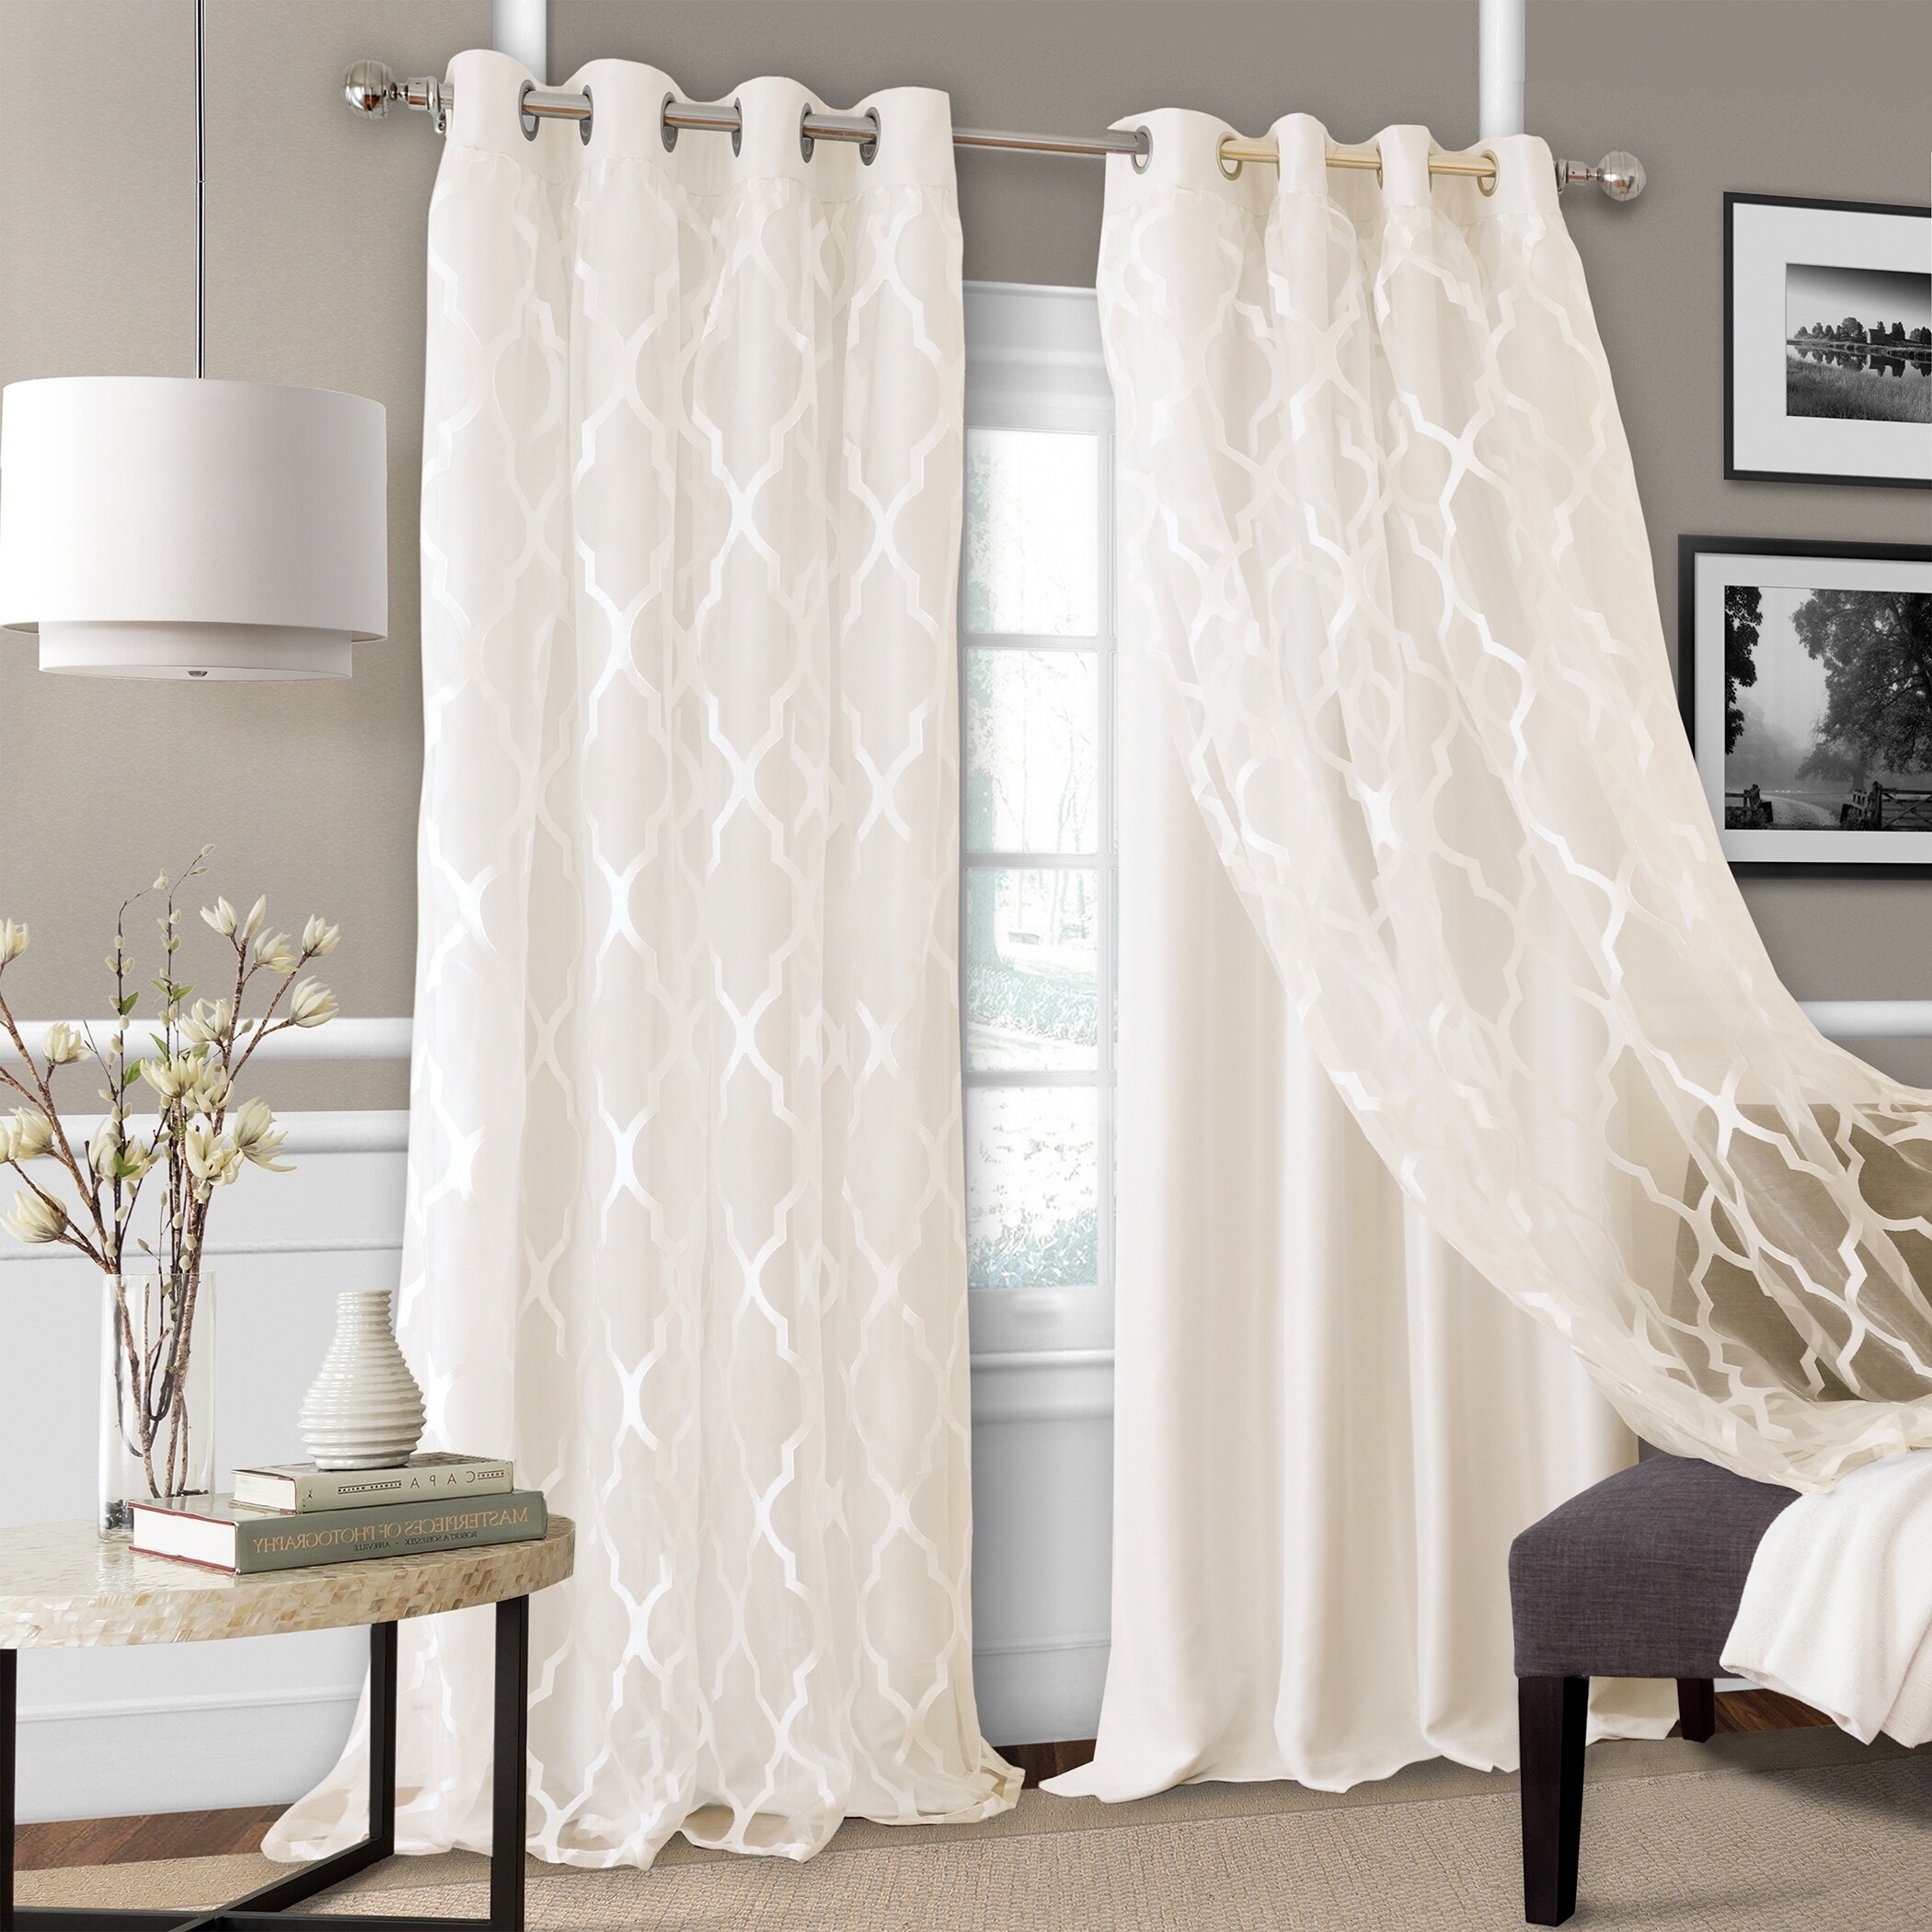 Single Window Curtains : Pro Space 50 In X 96 In Privacy Outdoor Single Window Curtain For Porch Patio Blackout Easy To Hang On 4 Panel Ouchm5096bsw4p The Home Depot : They’re typically used in areas with small windows.